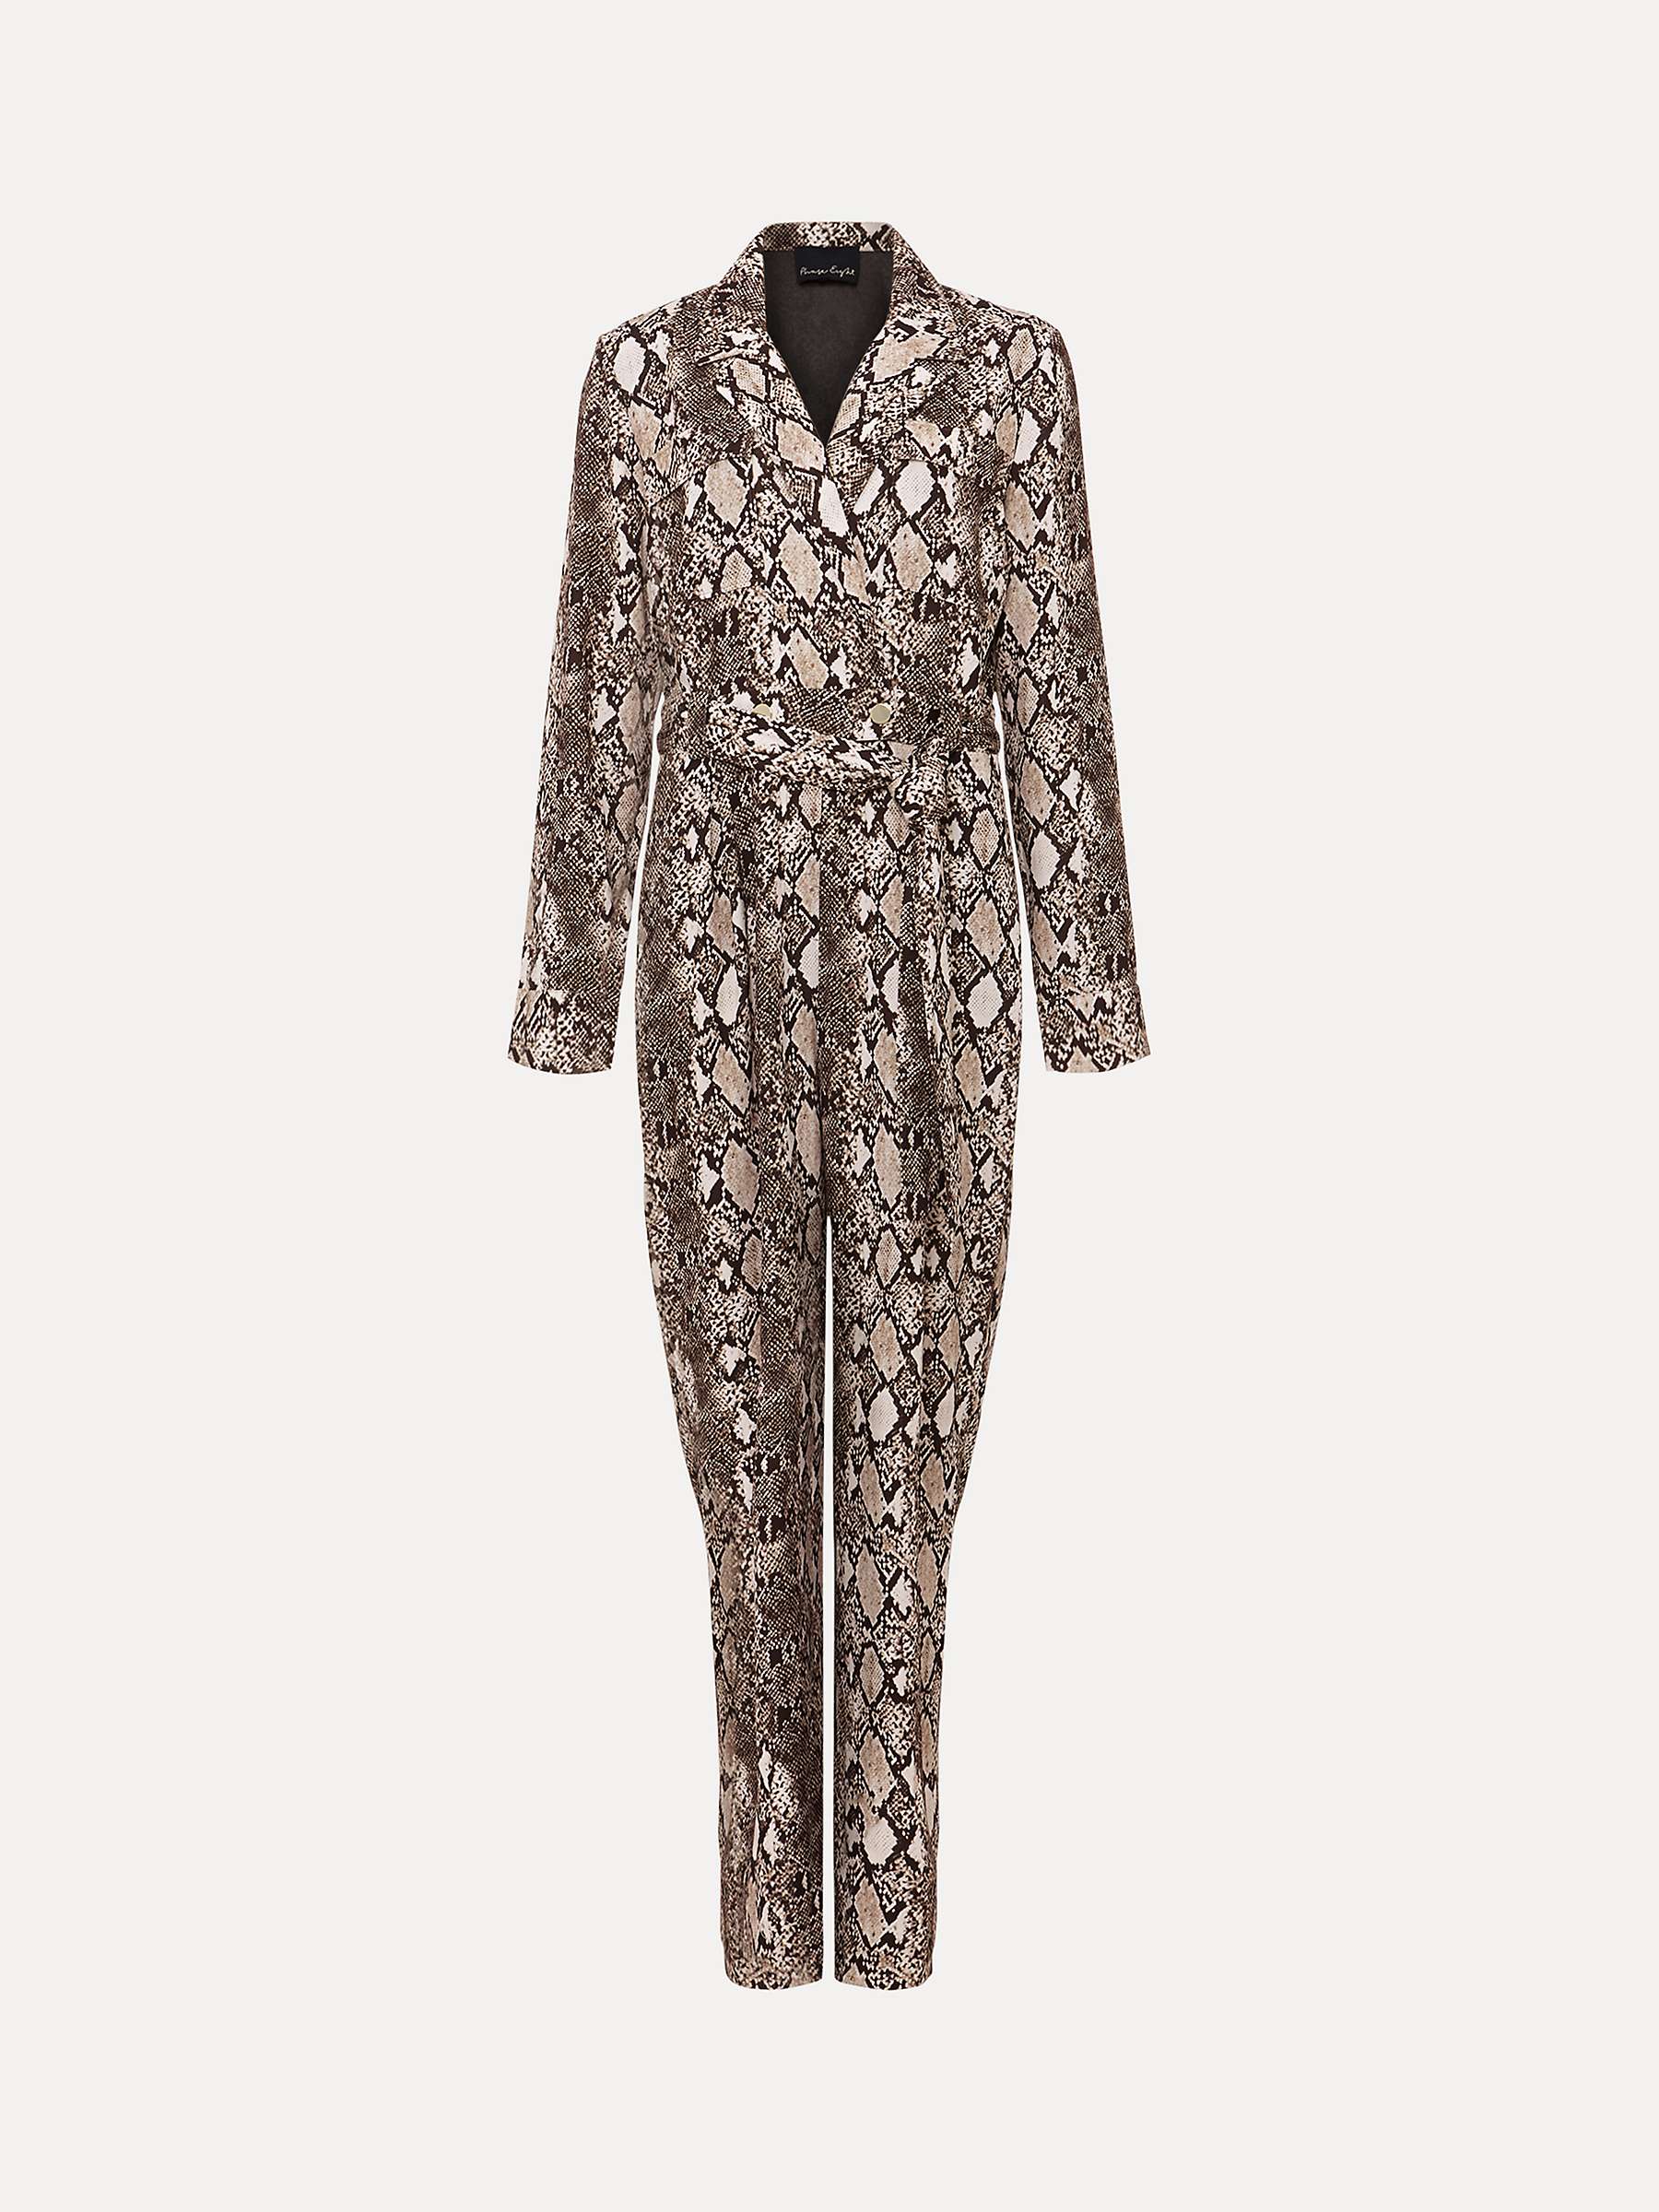 Buy Phase Eight Constance Snake Print Jumpsuit, Brown/Multi Online at johnlewis.com